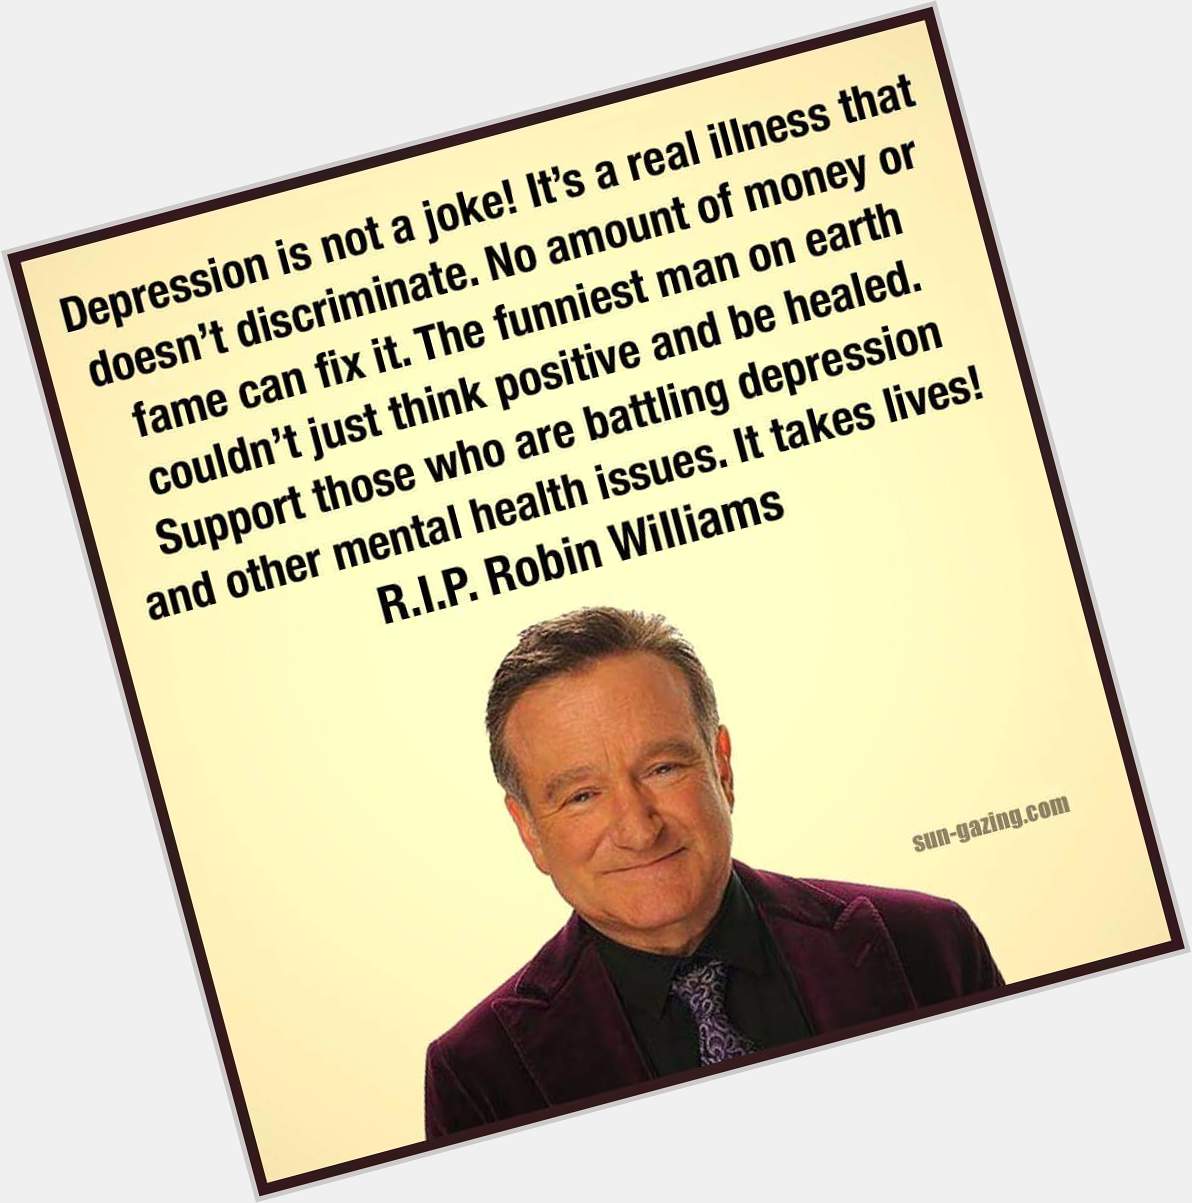 Happy 64 Birthday to Robin Williams.
Wherever you are I hope you\re at peace with yourself & having a great knees up! 